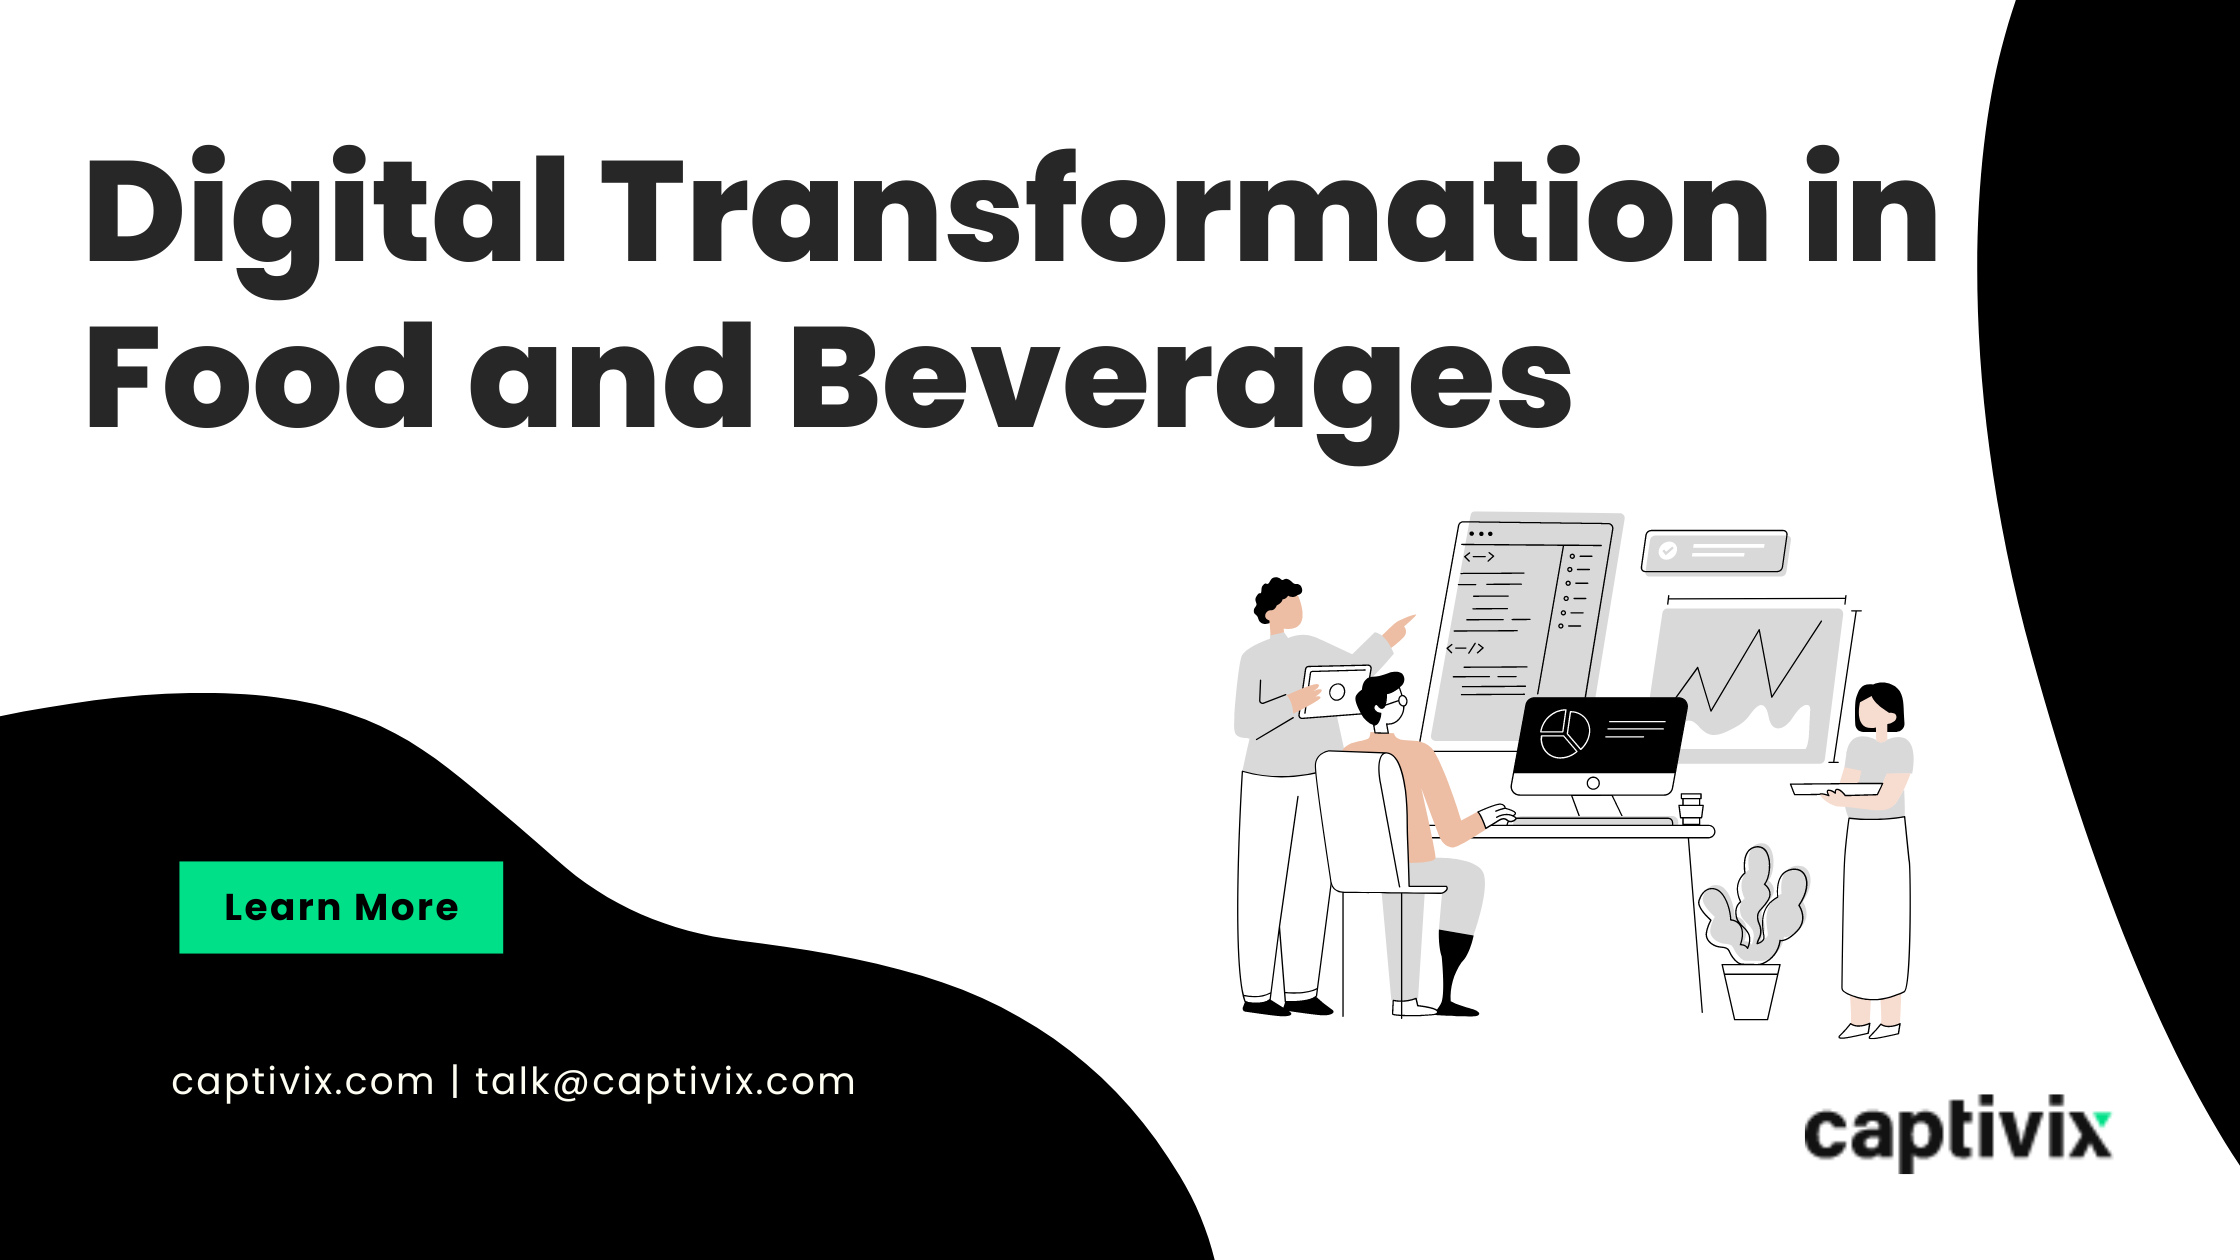 Digital Transformation in Food and Beverages